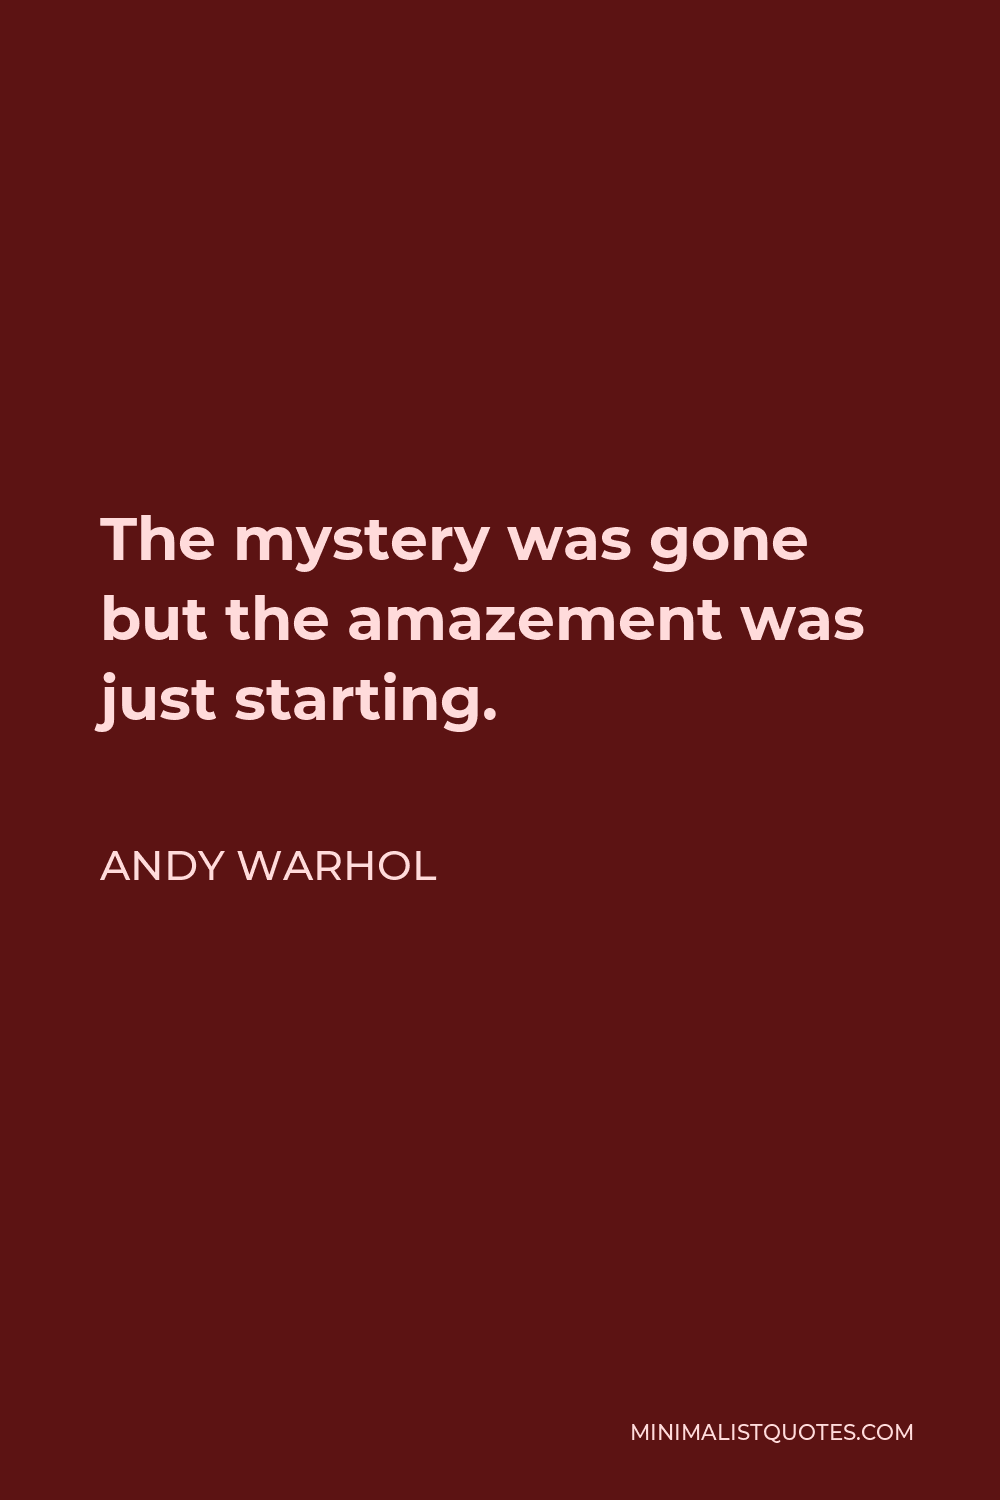 Andy Warhol Quote - The mystery was gone but the amazement was just starting.